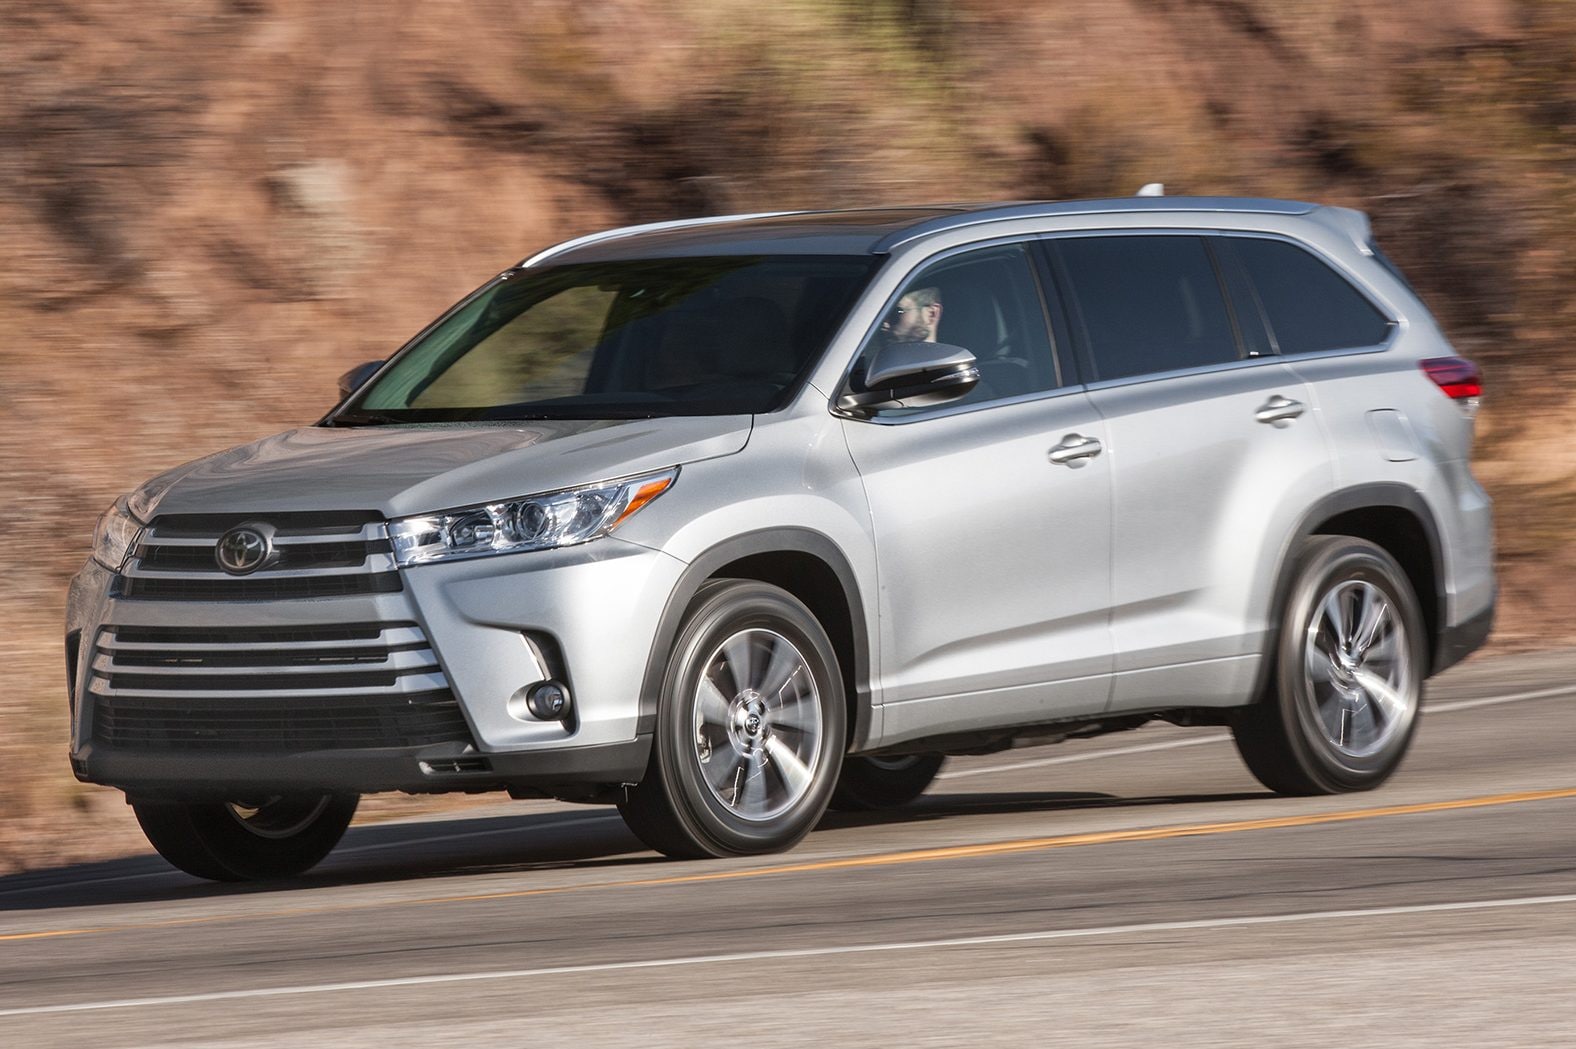 2017 Toyota Highlander: 8 Things to Know